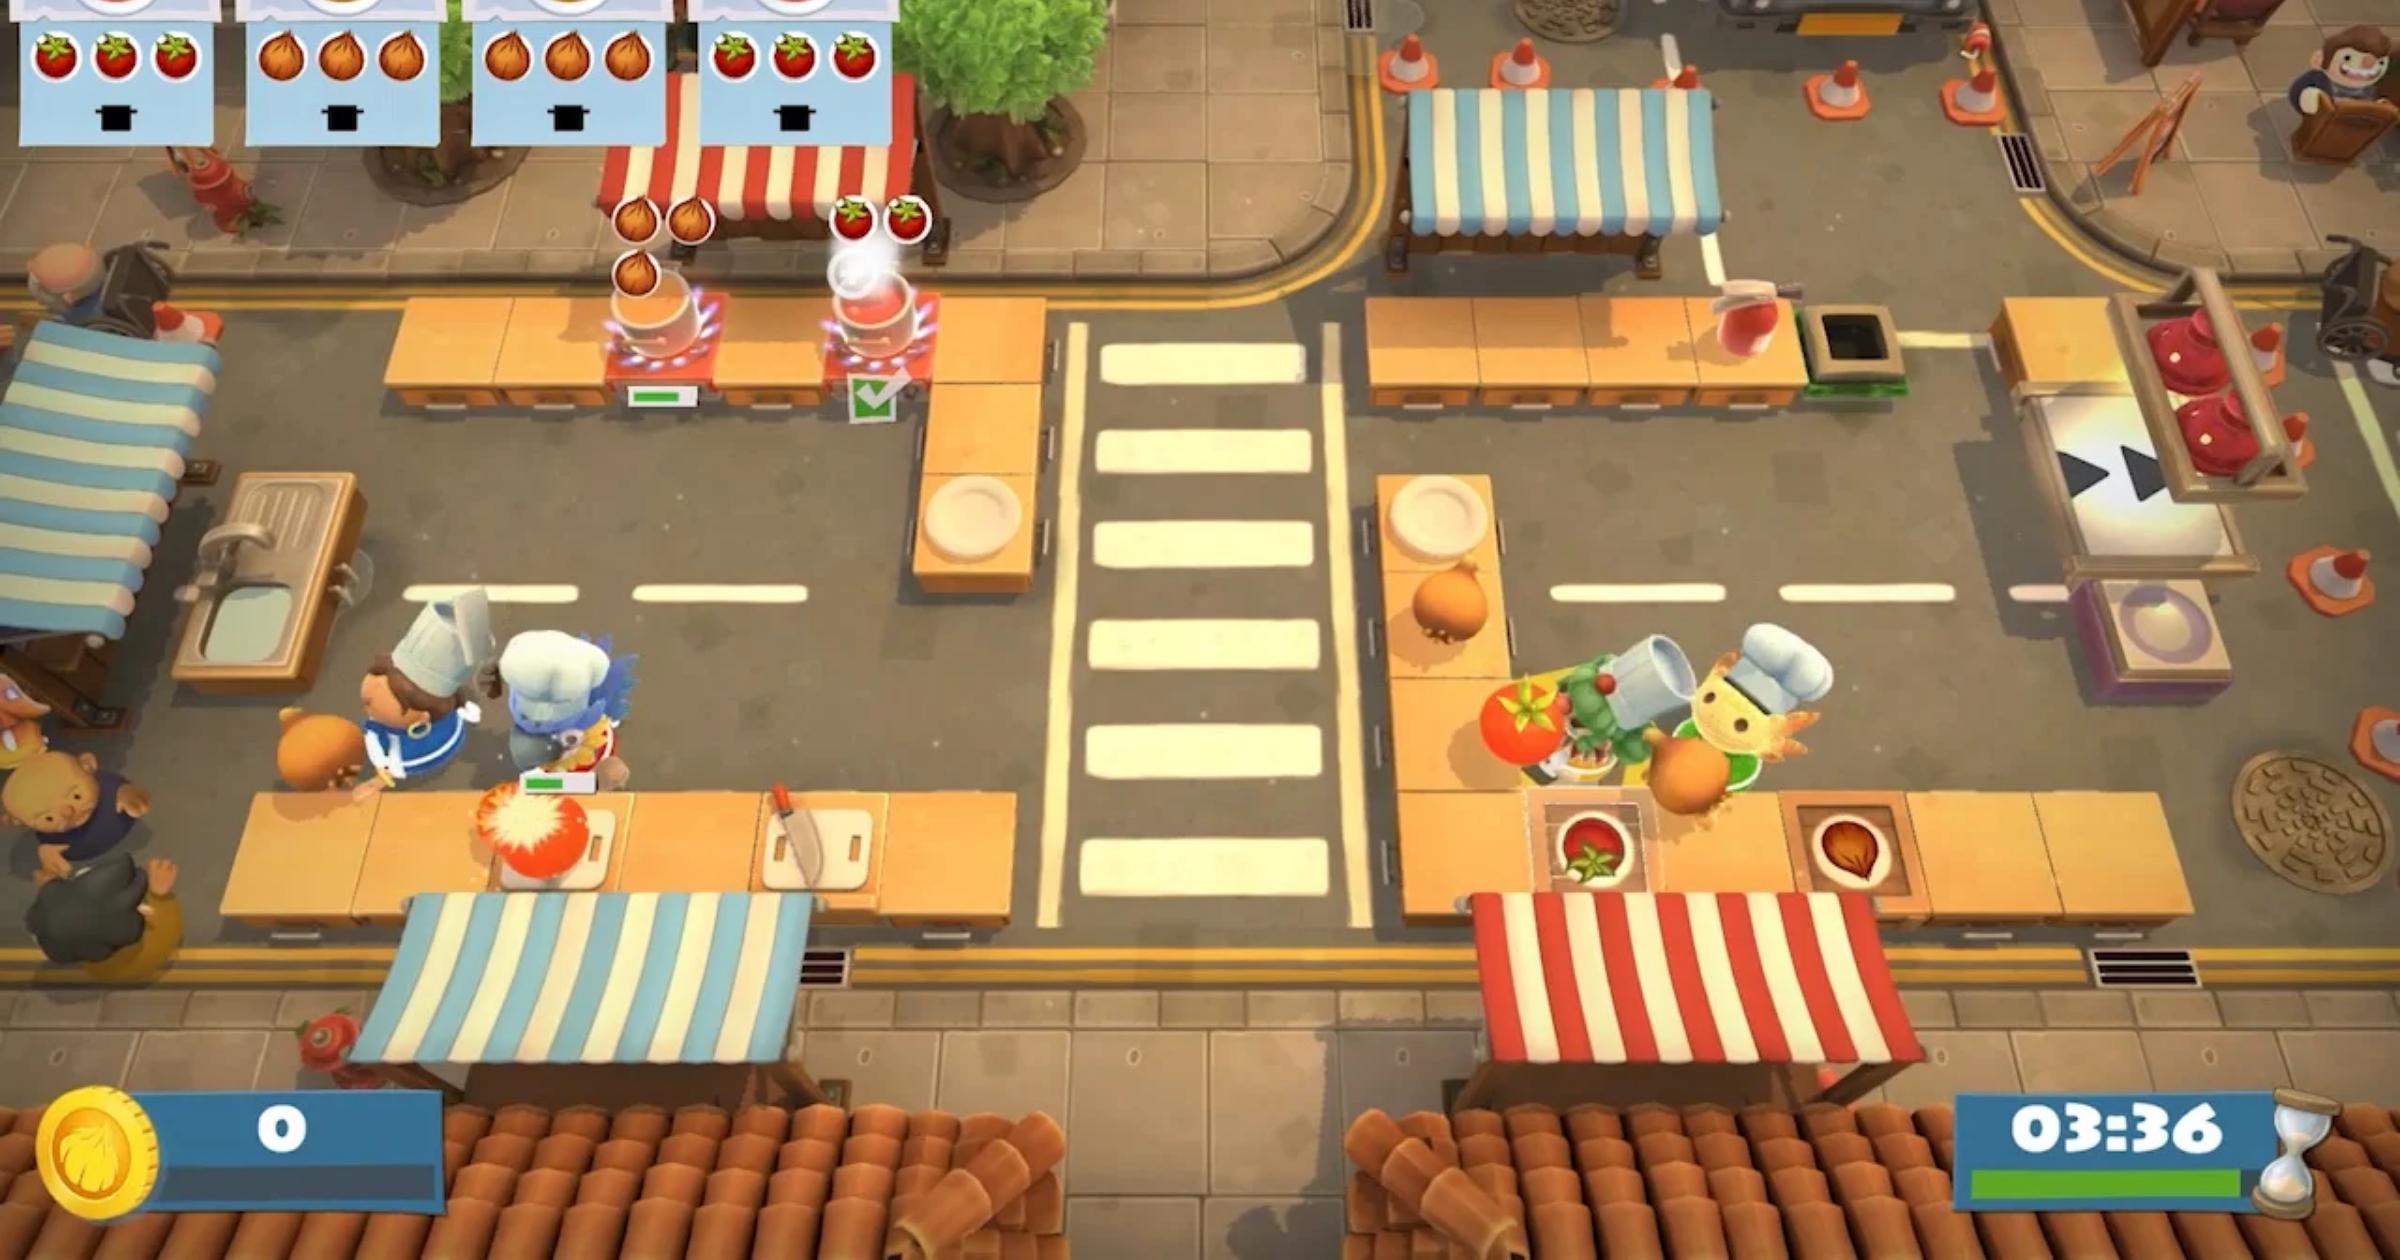 Overcooked! All You Can Eat - Nintendo Switch